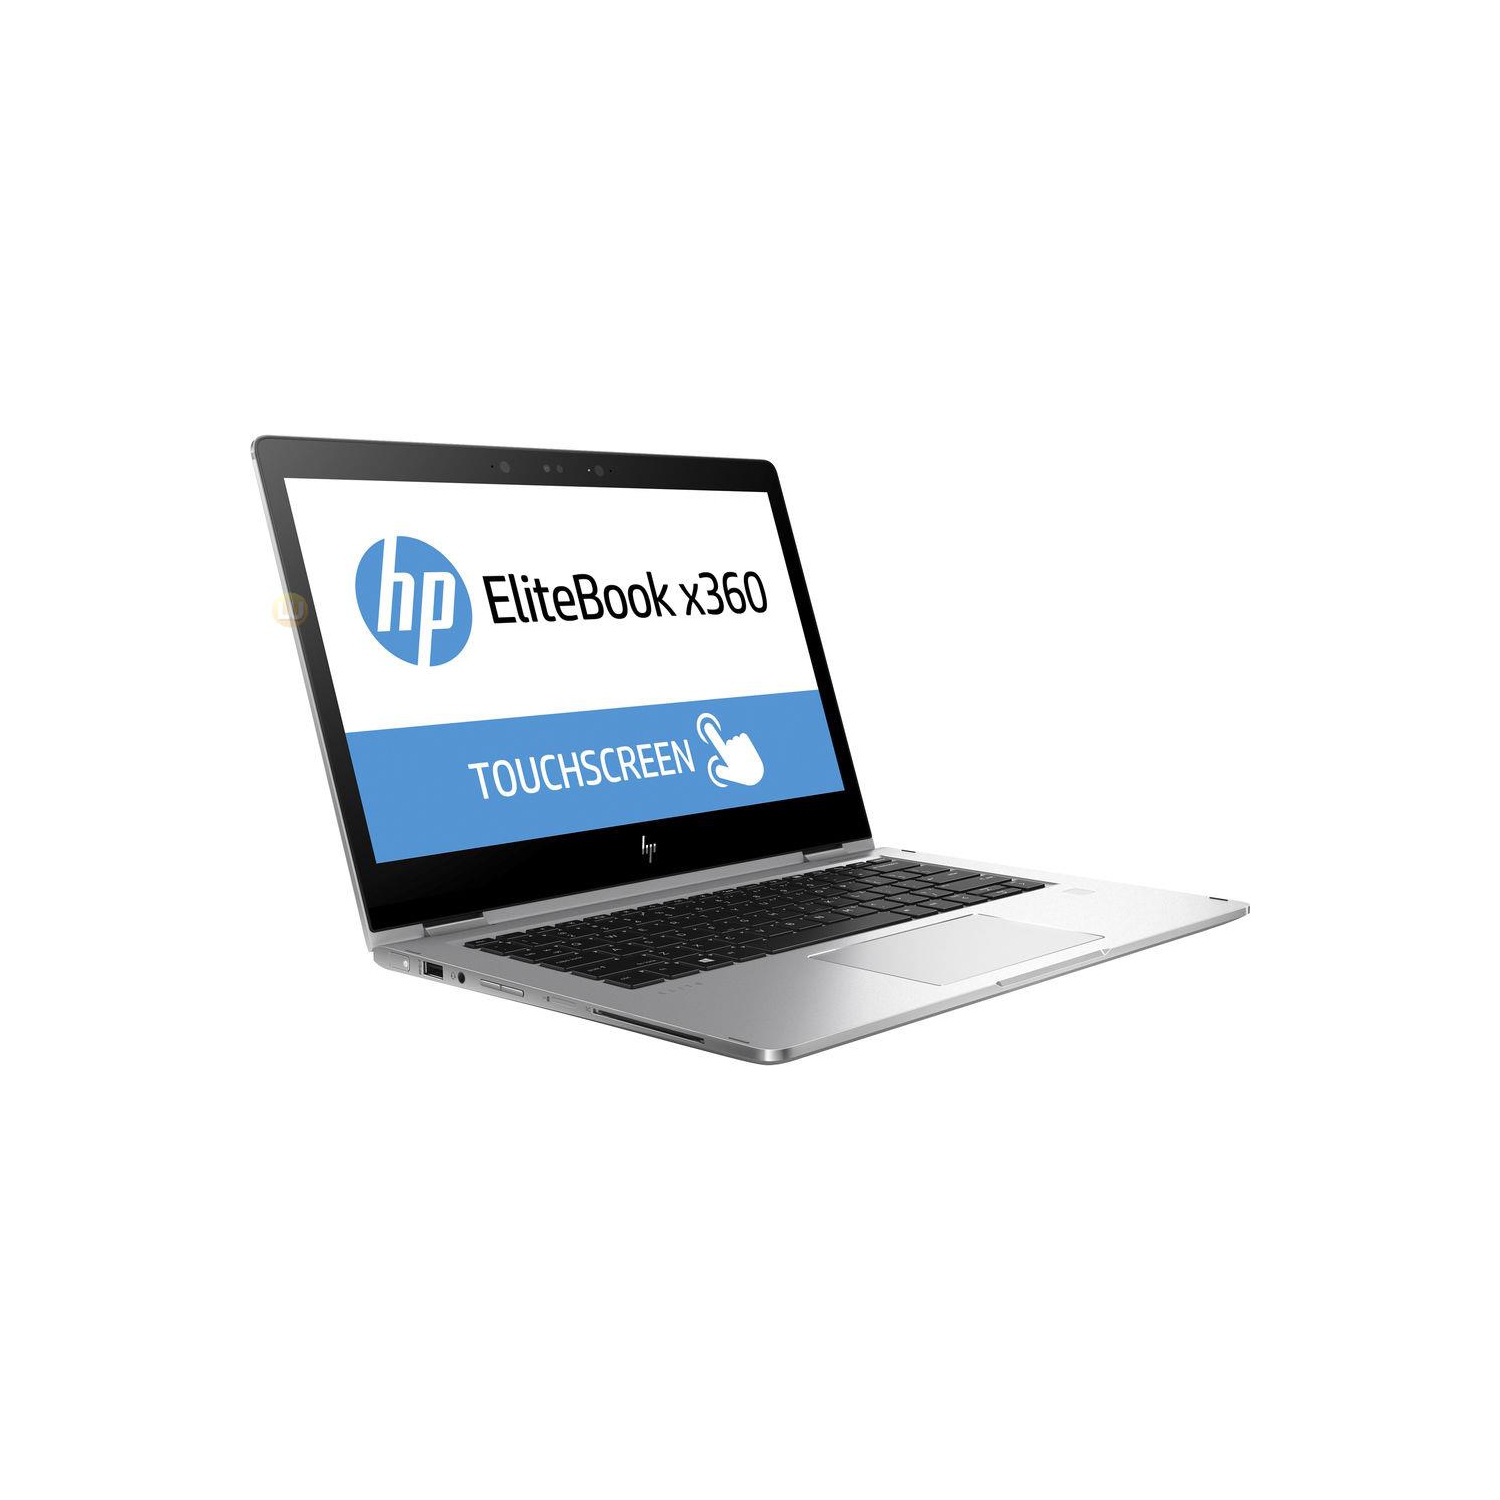 Refurbished (Excellent) - HP EliteBook x360 1030 G2 13.3" Touchscreen Laptop - Core i7 7600U - 16 GB RAM - 512 GB SSD - Win 10 Pro - Refurbished (Excellent condition)